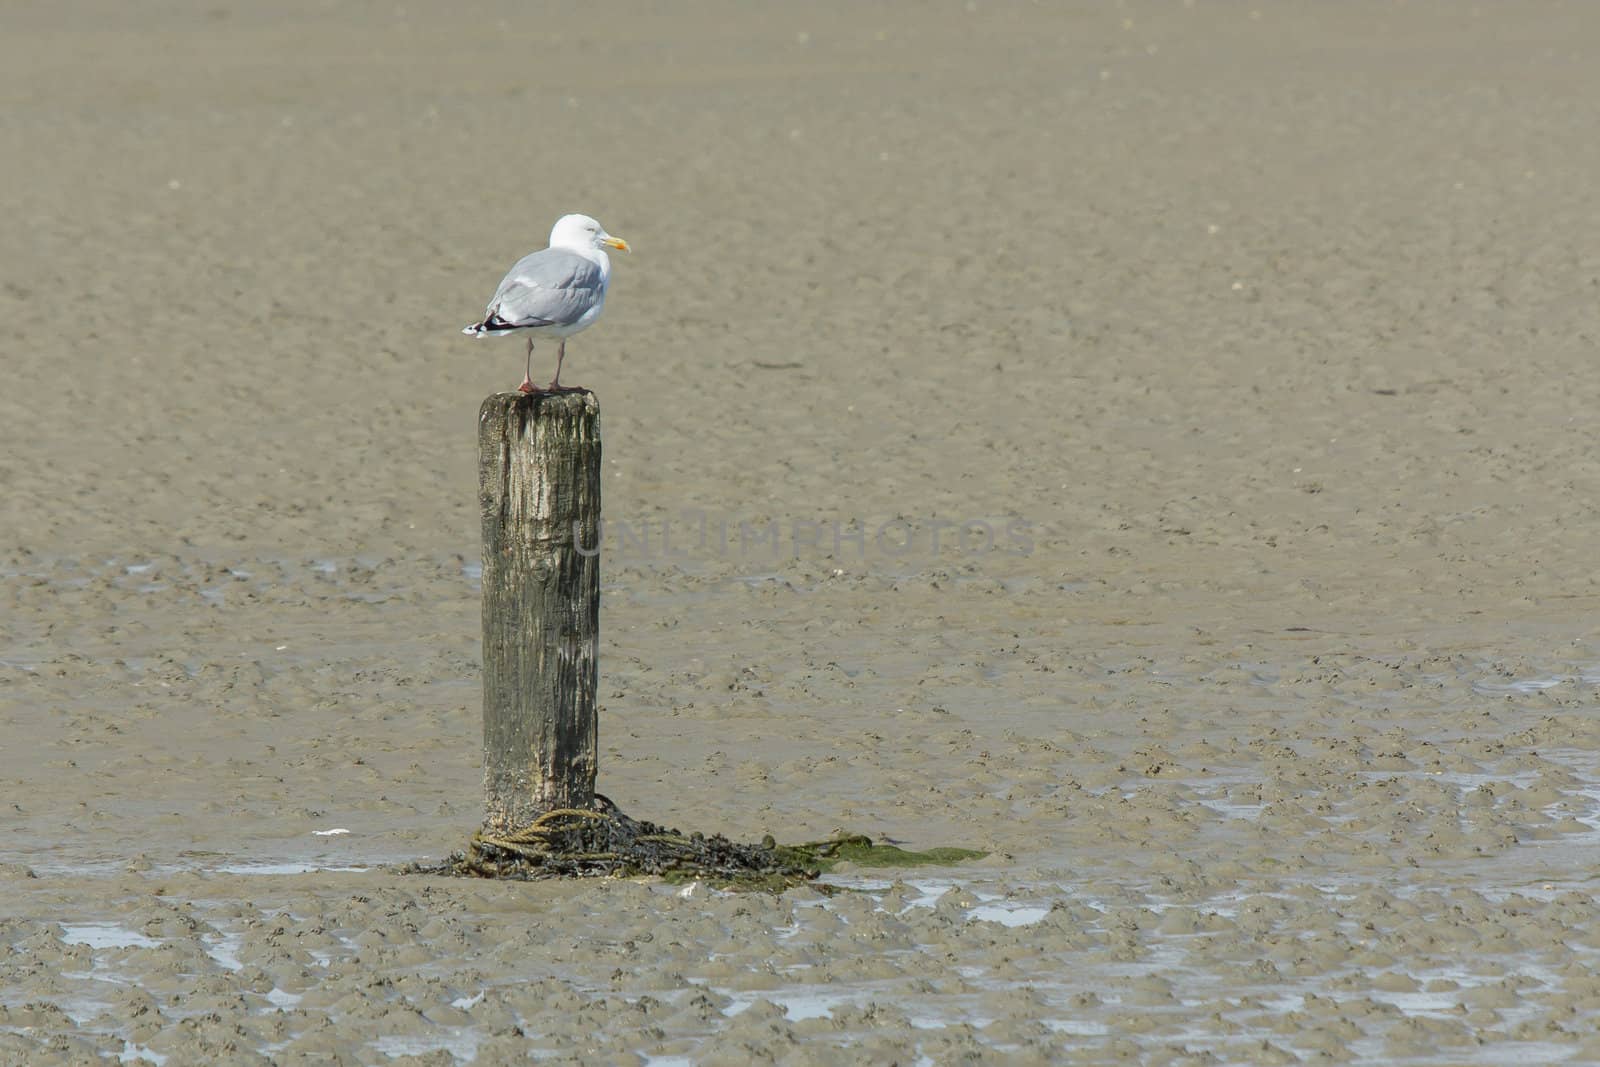 A herring gull on a pole during lowtide